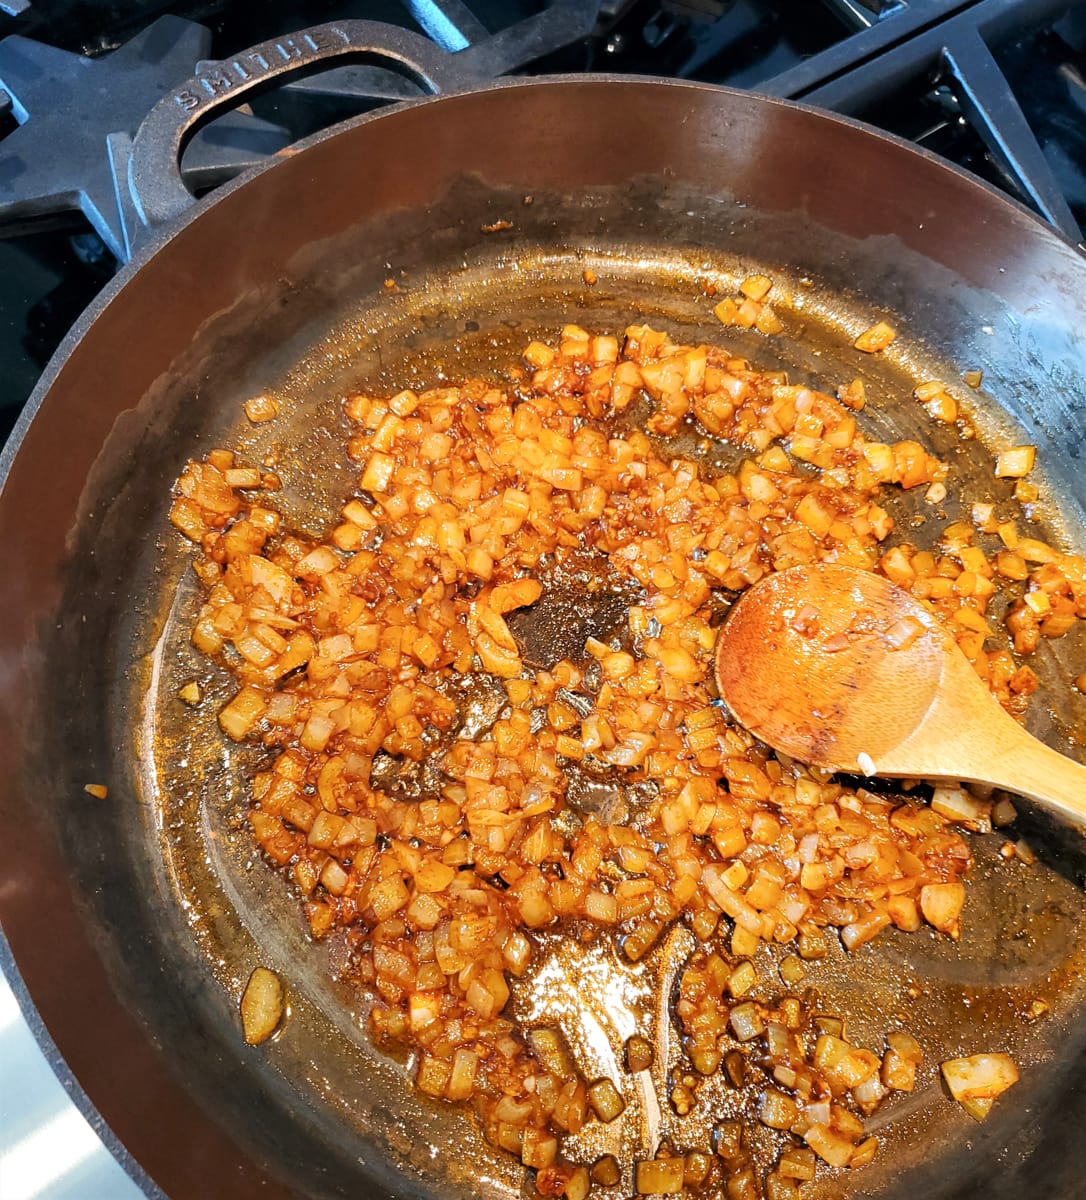 Onion and spices in a skillet.